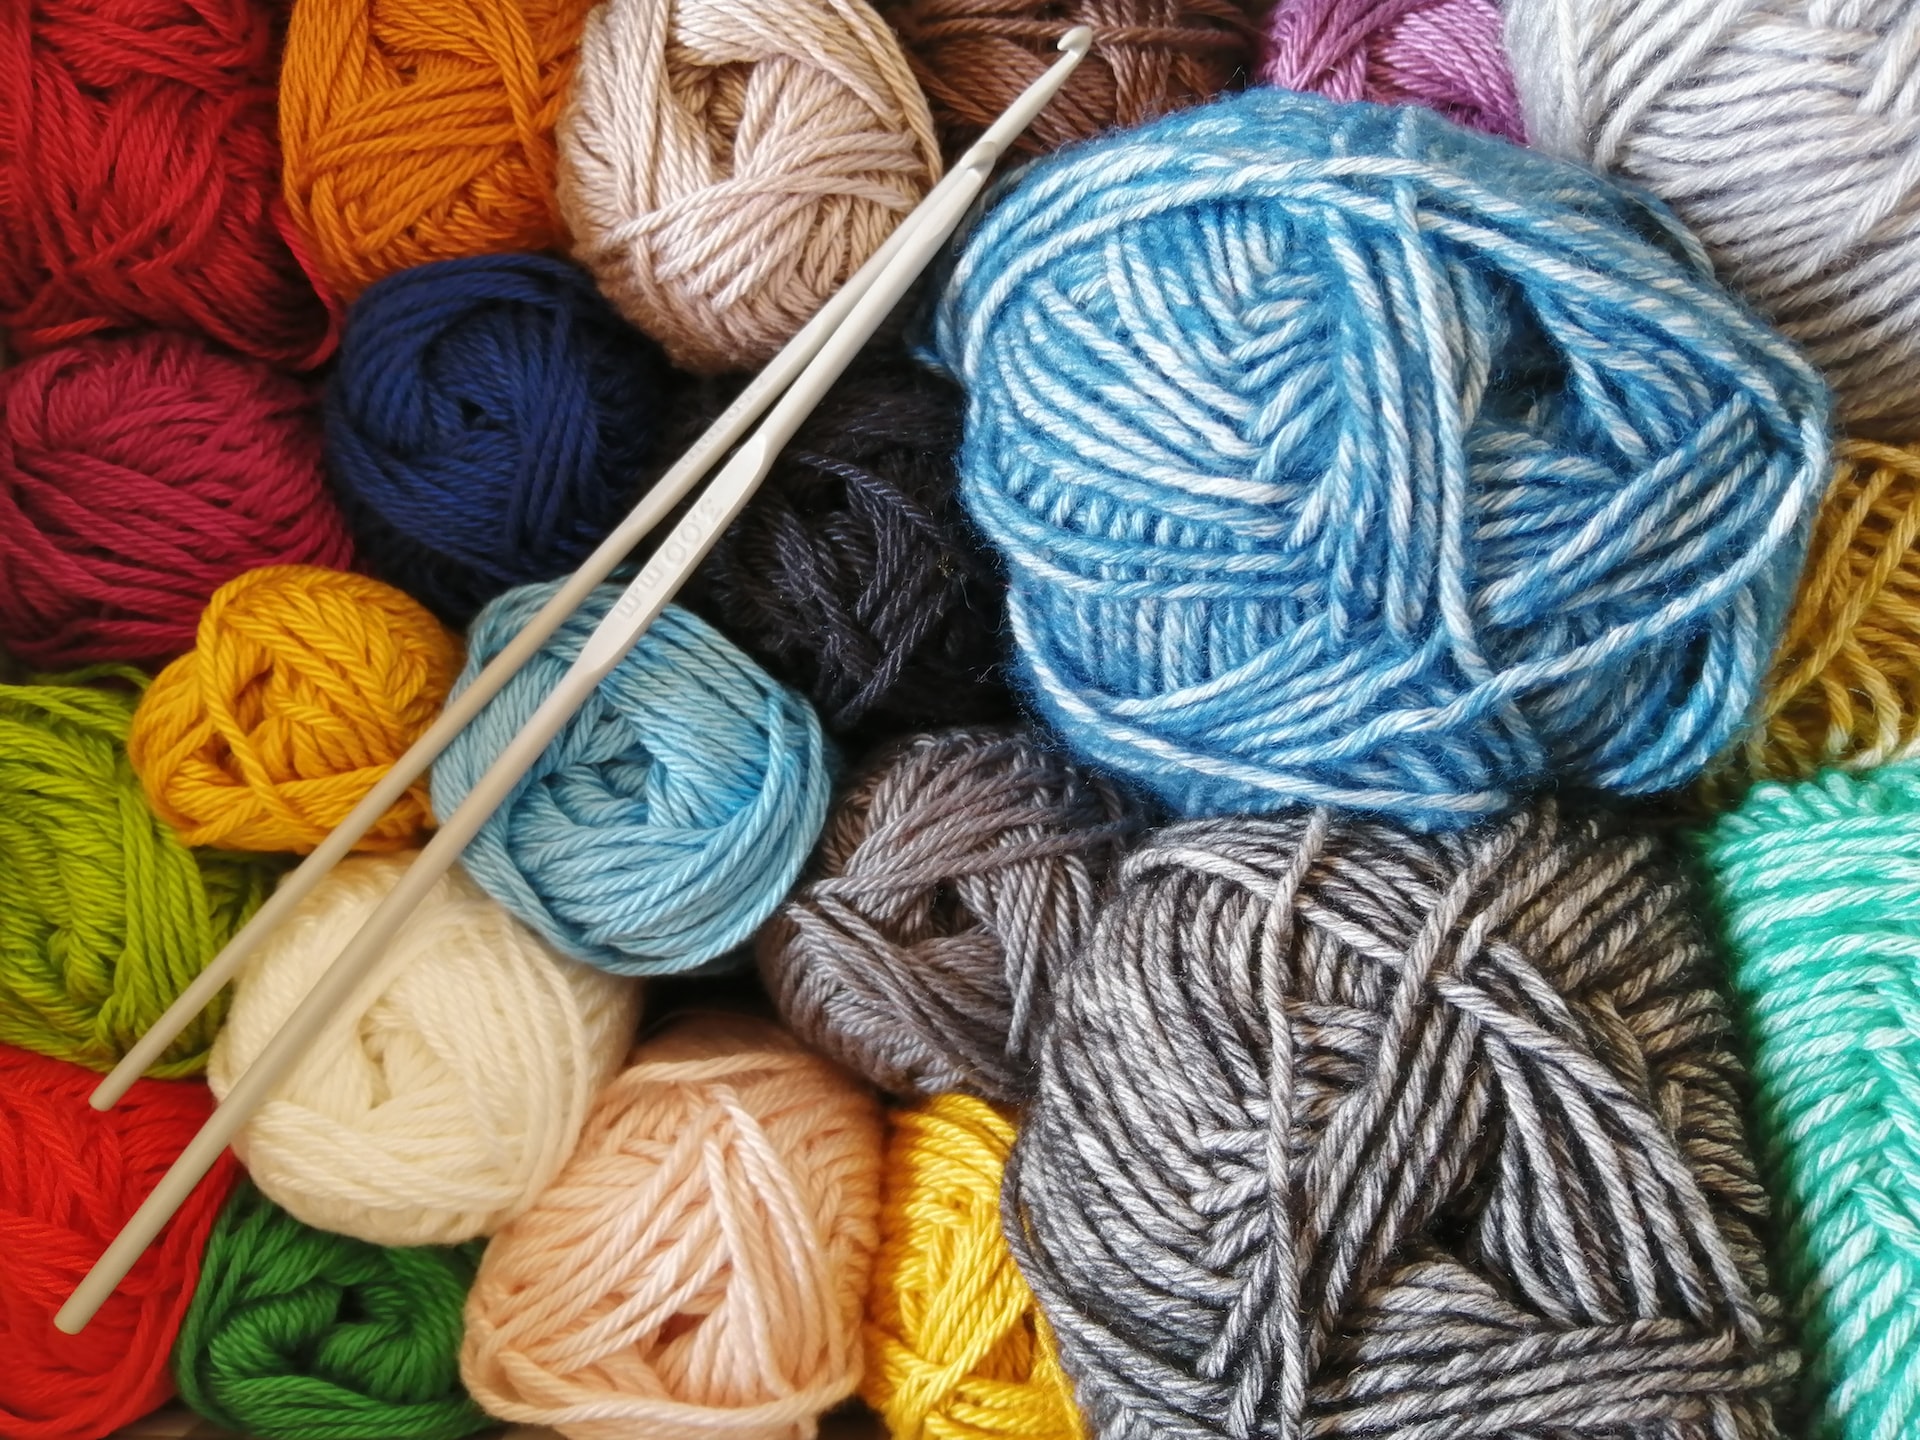 photo of balls of yarn in rainbow colors with two crochet hooks